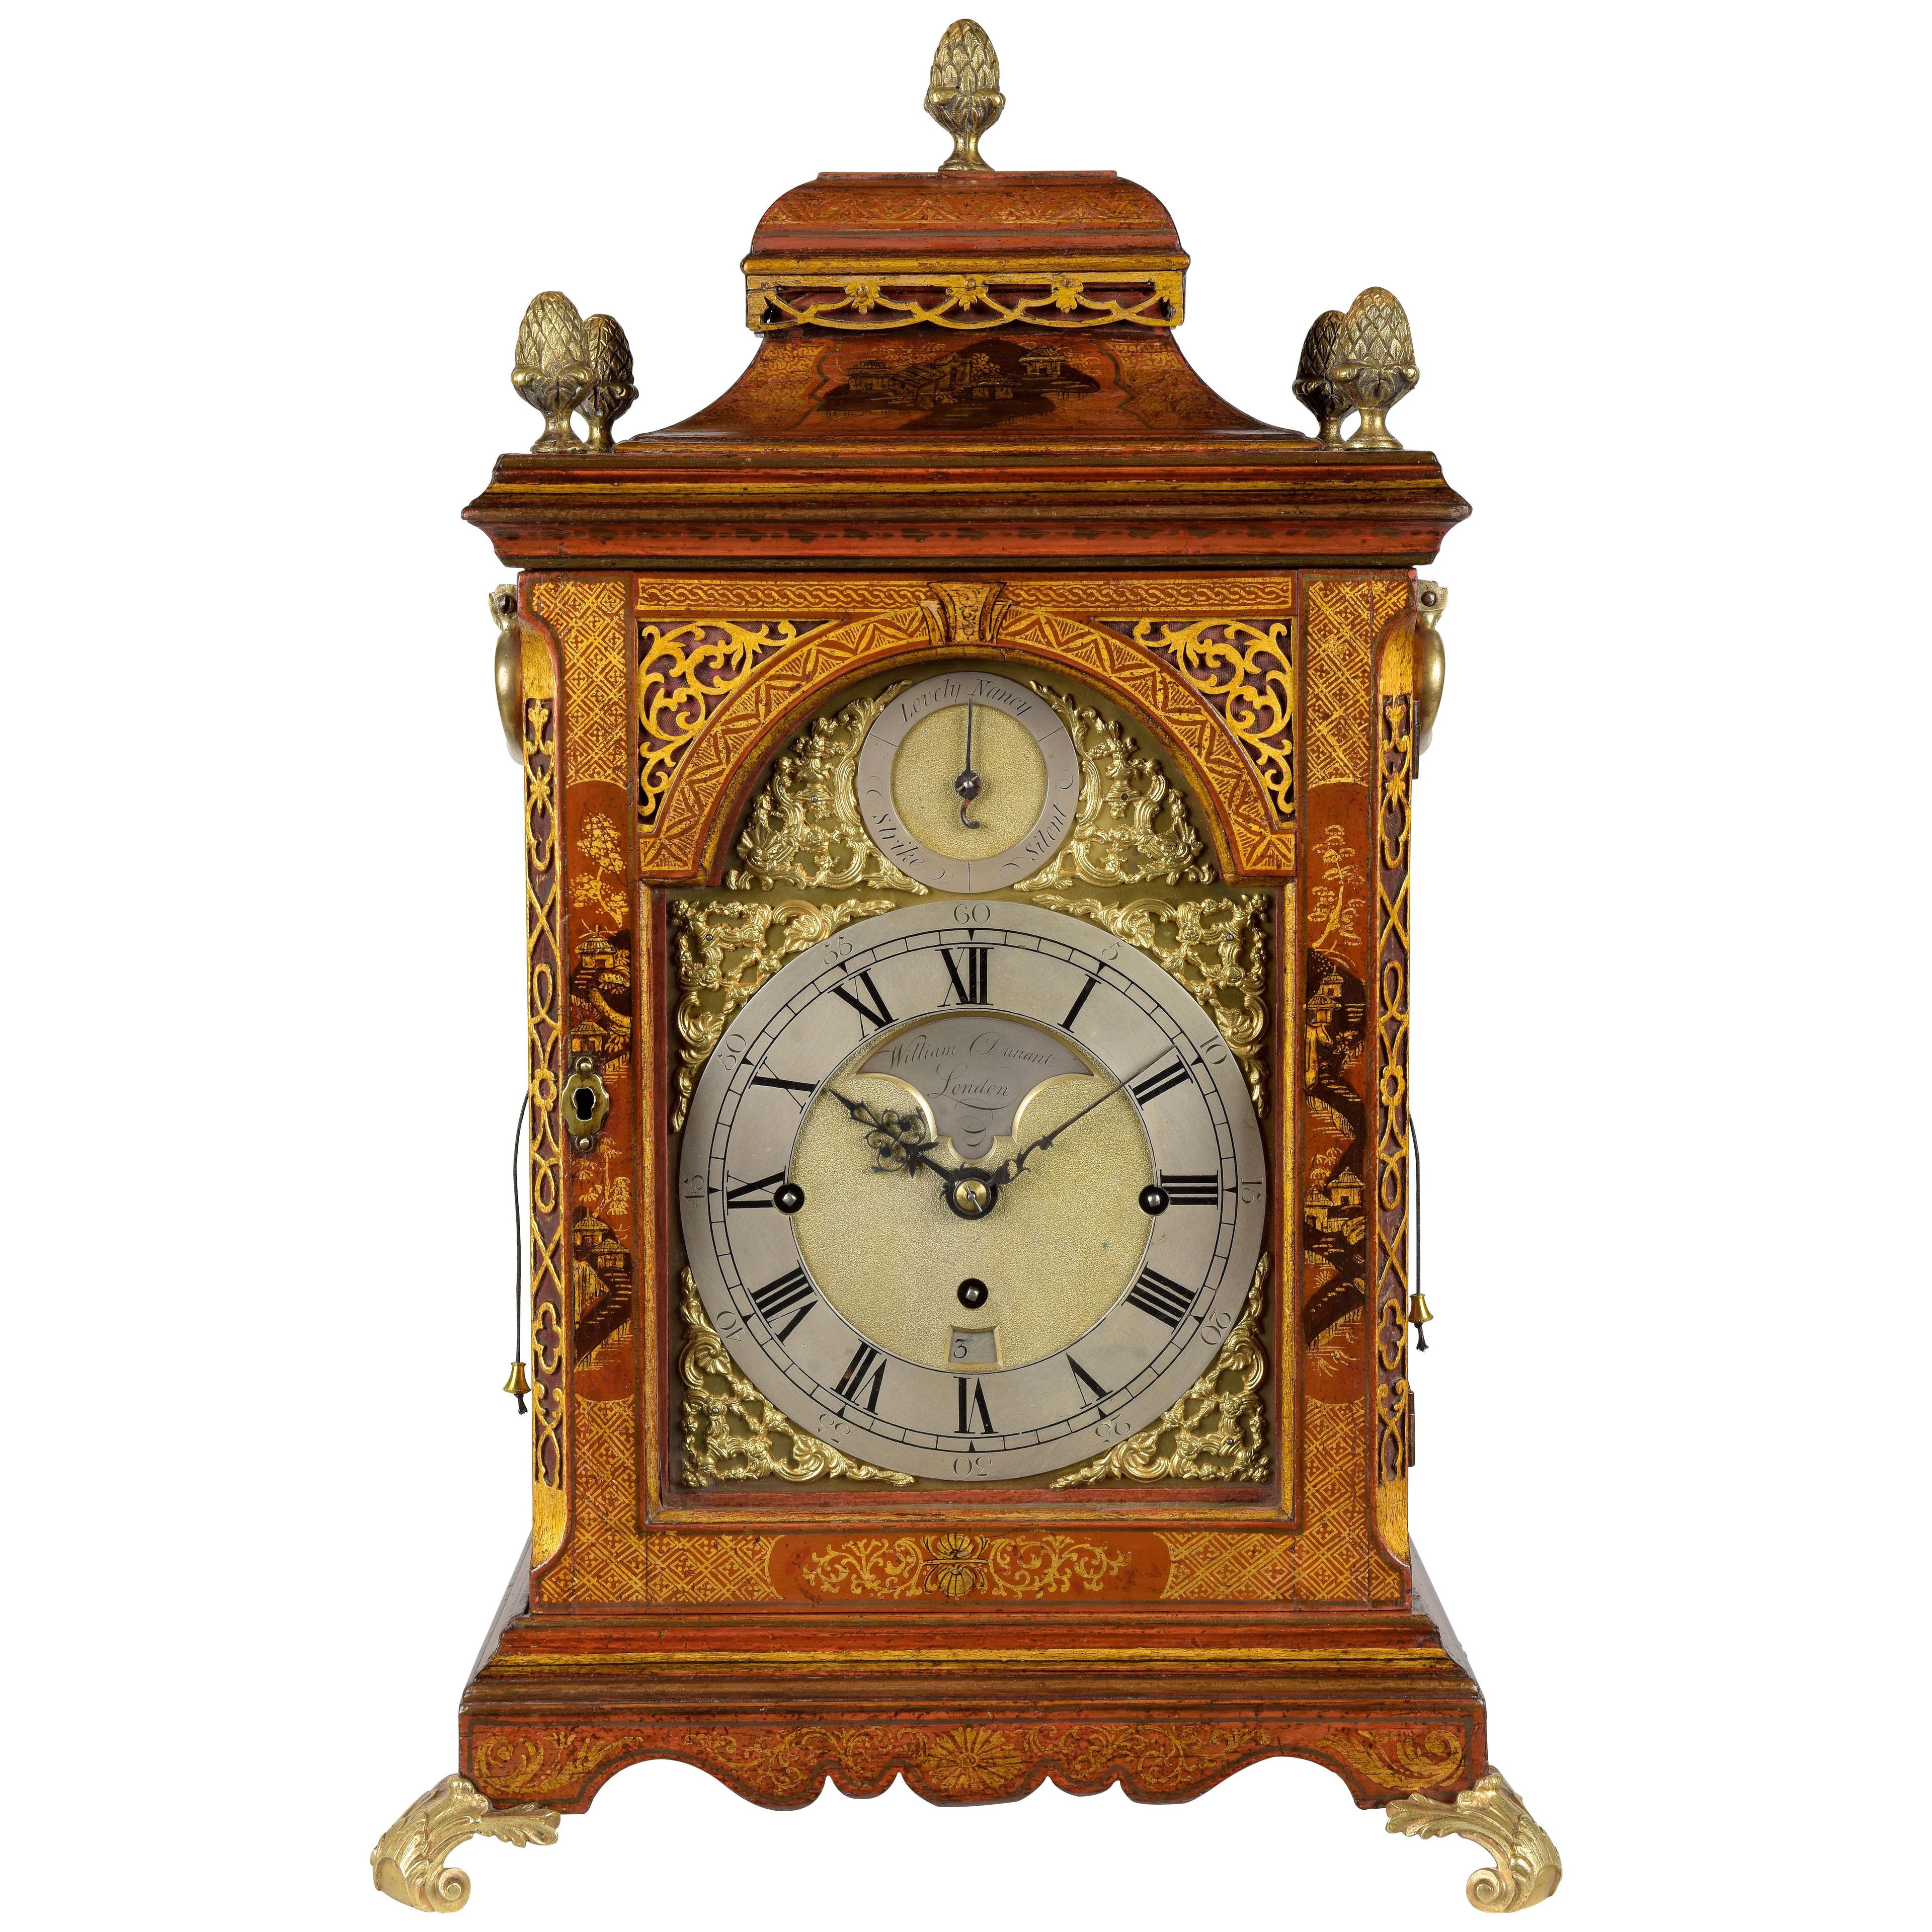 WILLIAM DUNANT, London. A GEORGE III PERIOD MUSICAL TABLE CLOCK